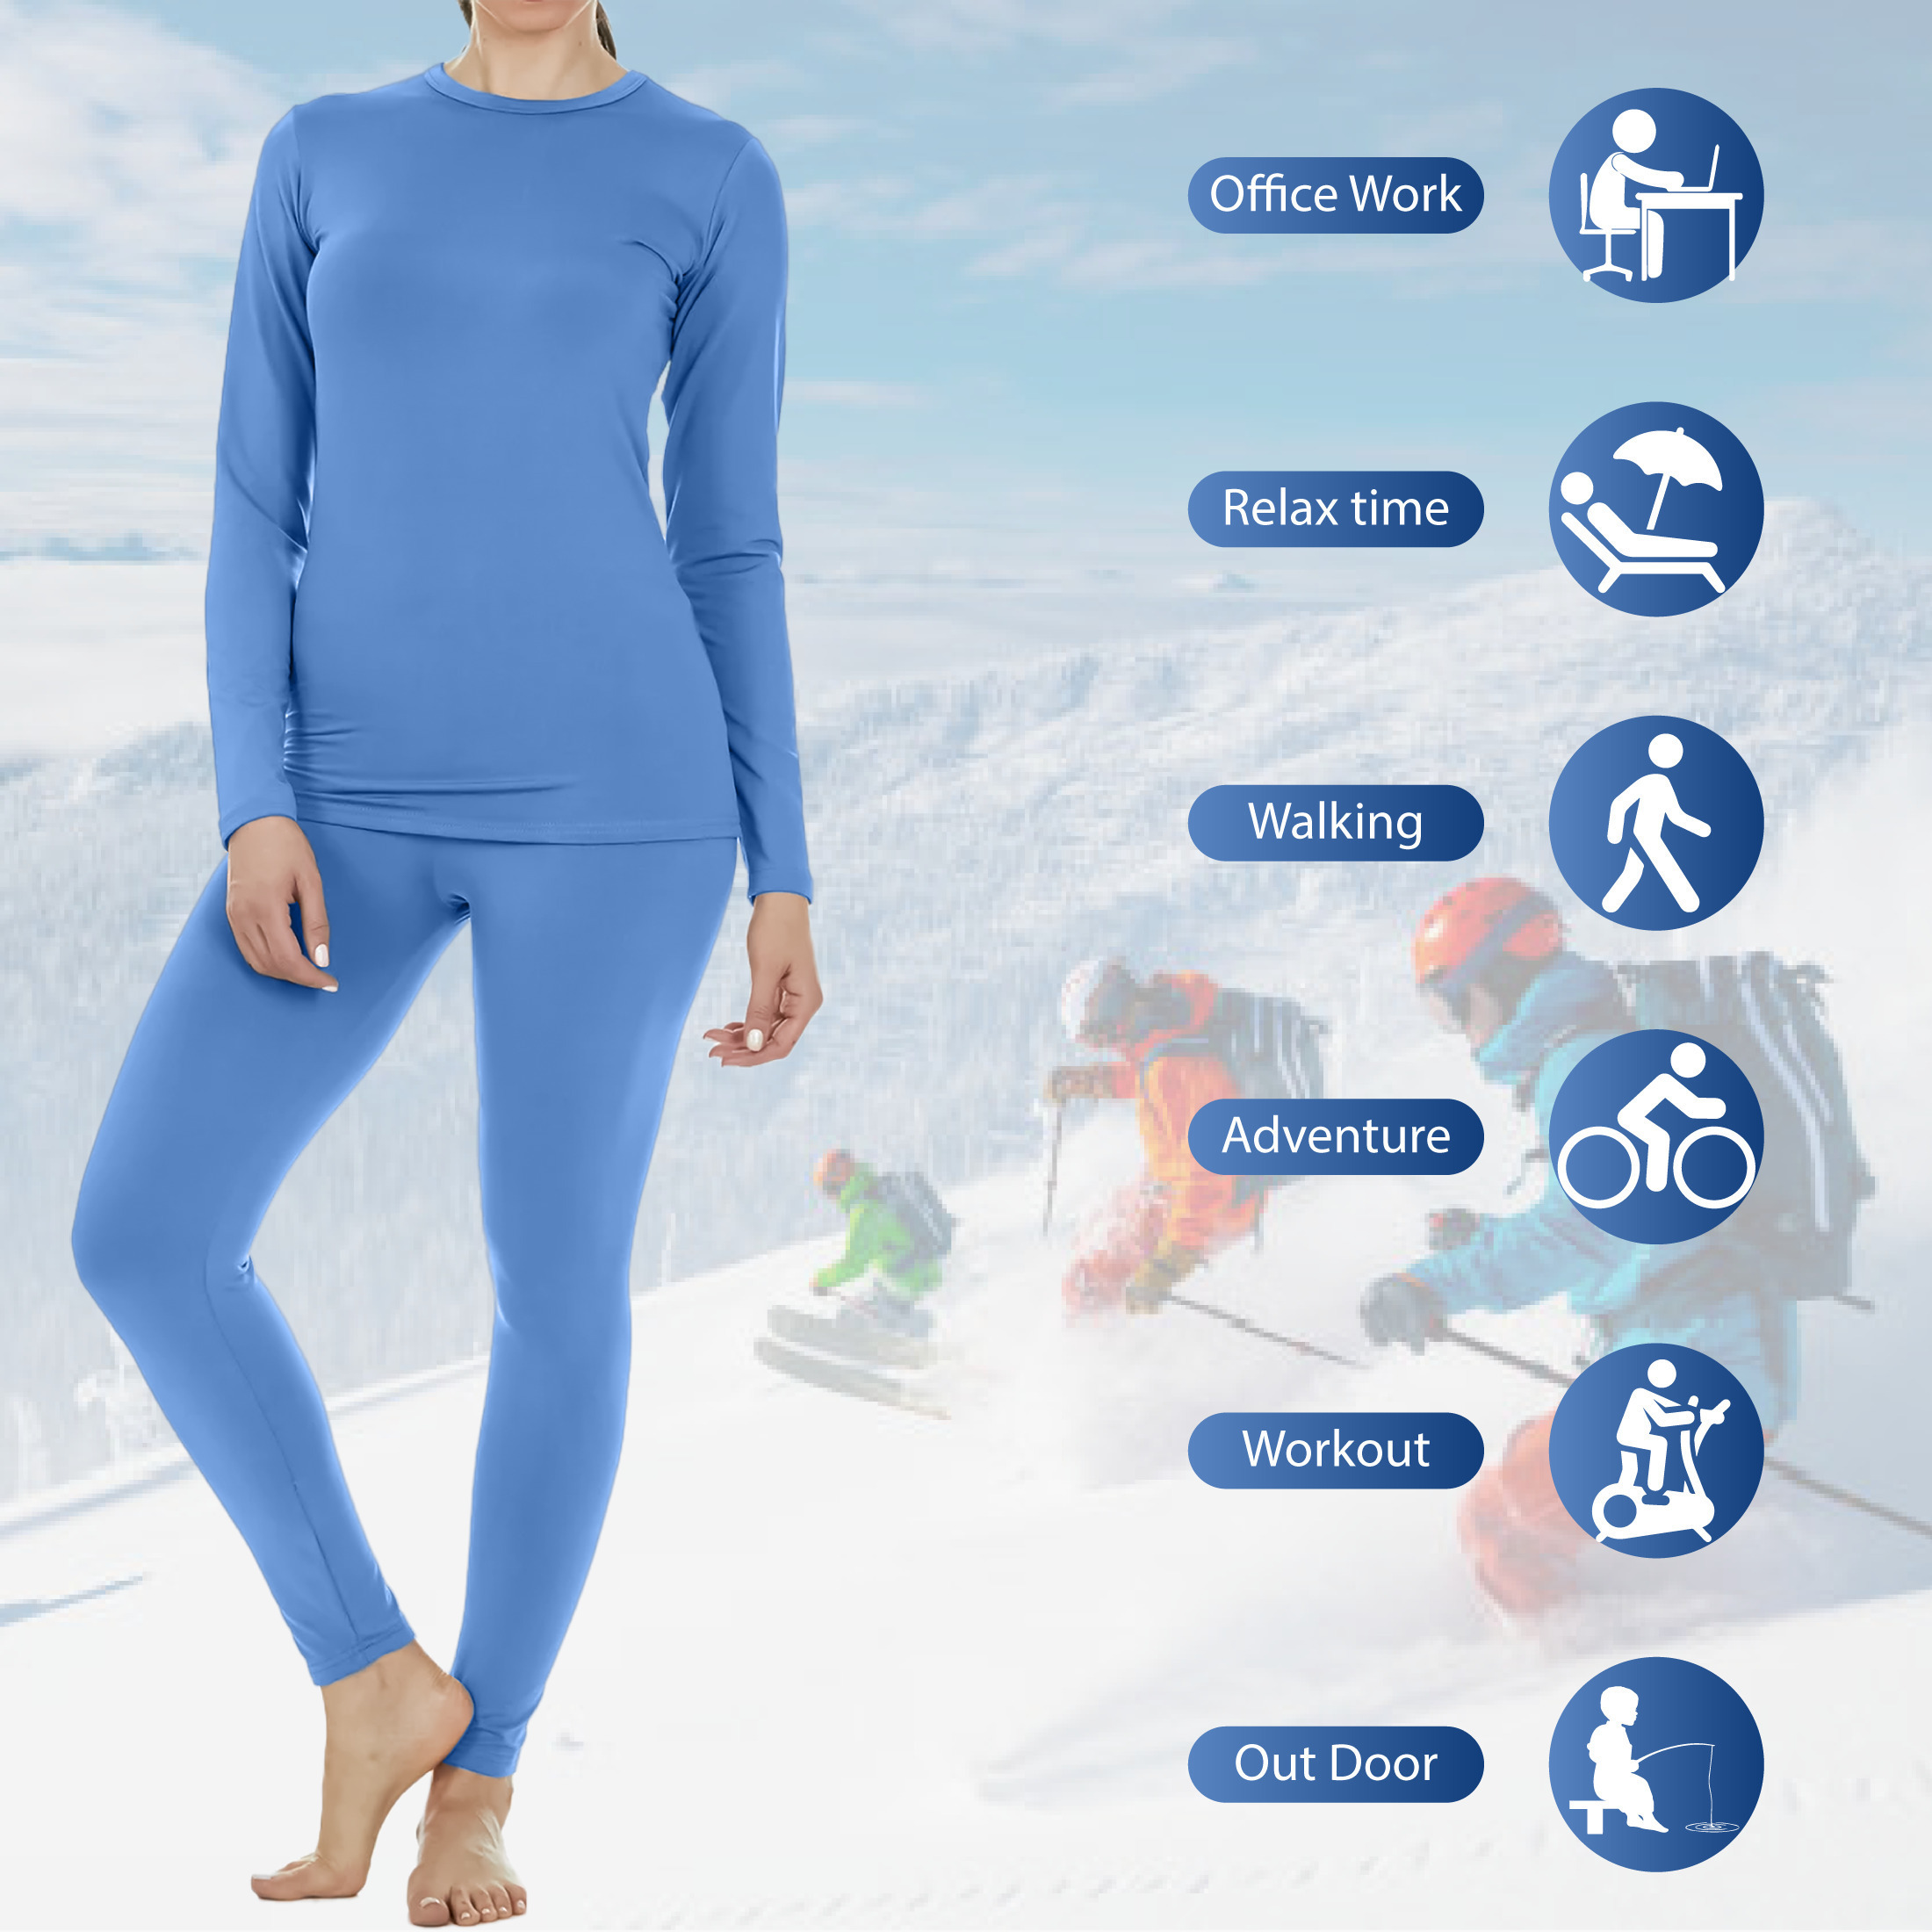 3 Sets: Women's Fleece Lined Thermal Sets For Cold Weather - Large